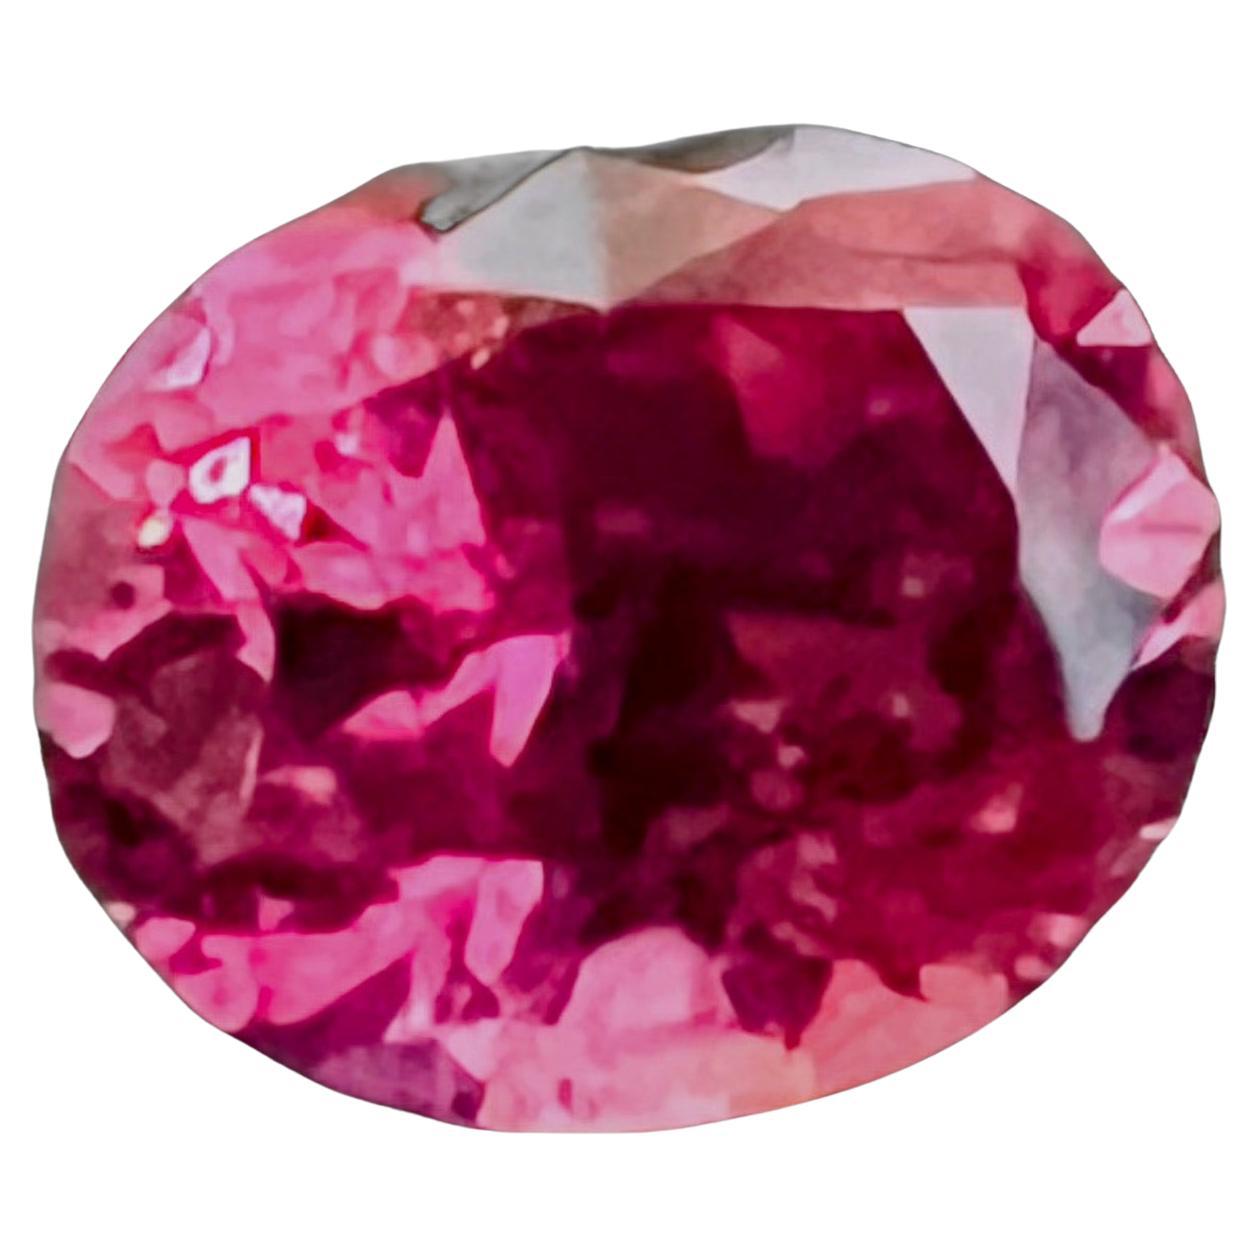 A Radiant Pink Dream in this rare 9.60ct Oval Pink Rubellite Tourmaline. Mother Nature herself has painted this tourmaline with the most dramatic shades of pink, from soft pastels to deep rosy tones, it's a masterpiece of pinkish hues that embodies